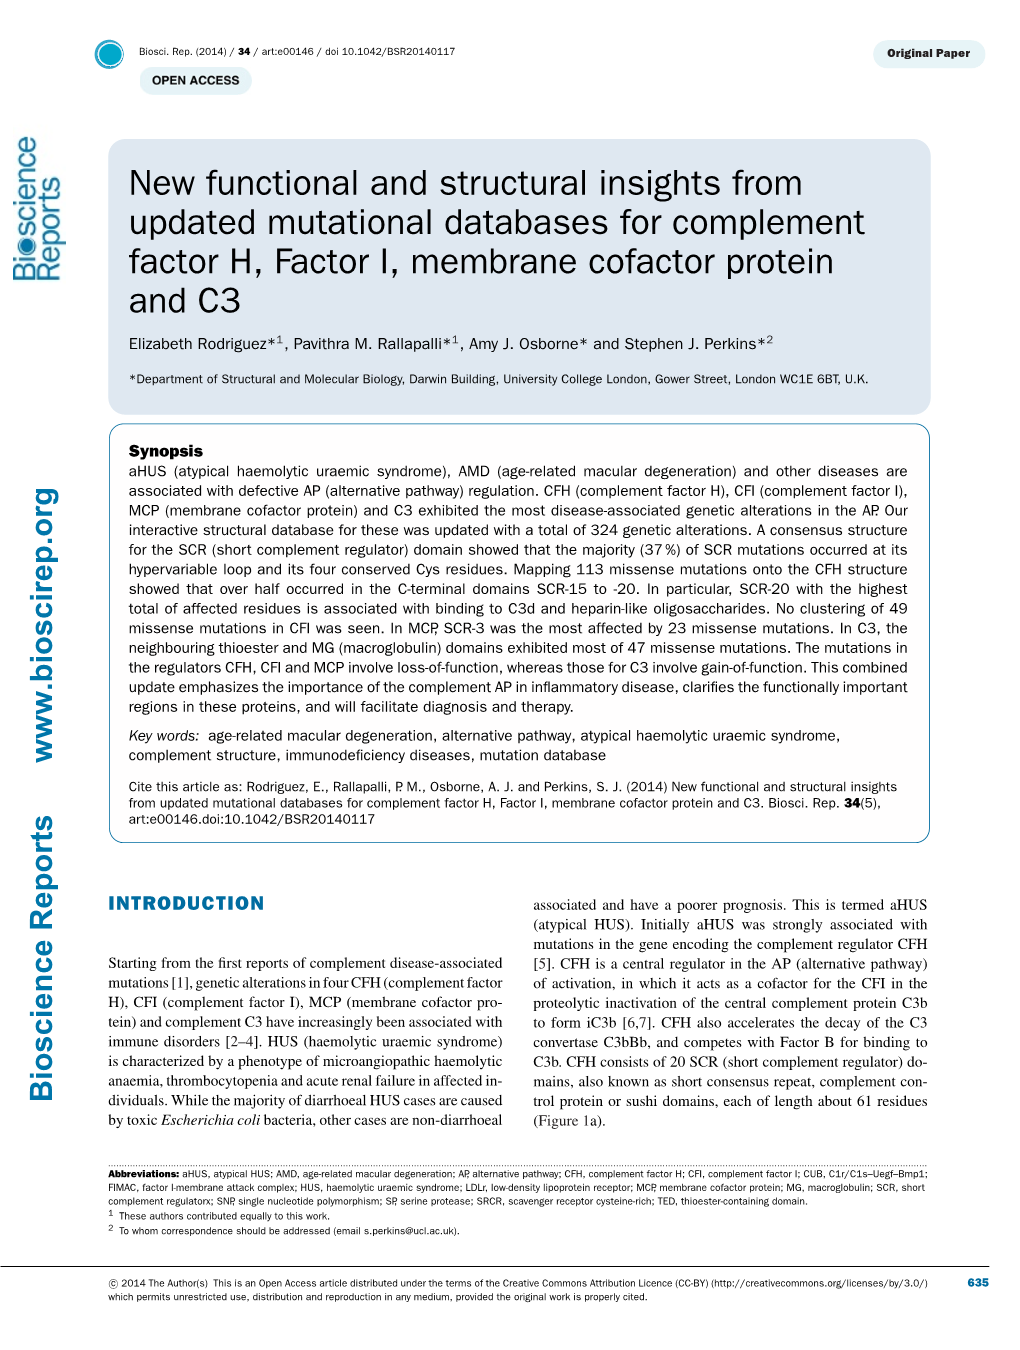 New Functional and Structural Insights from Updated Mutational Databases for Complement Factor H, Factor I, Membrane Cofactor Protein and C3